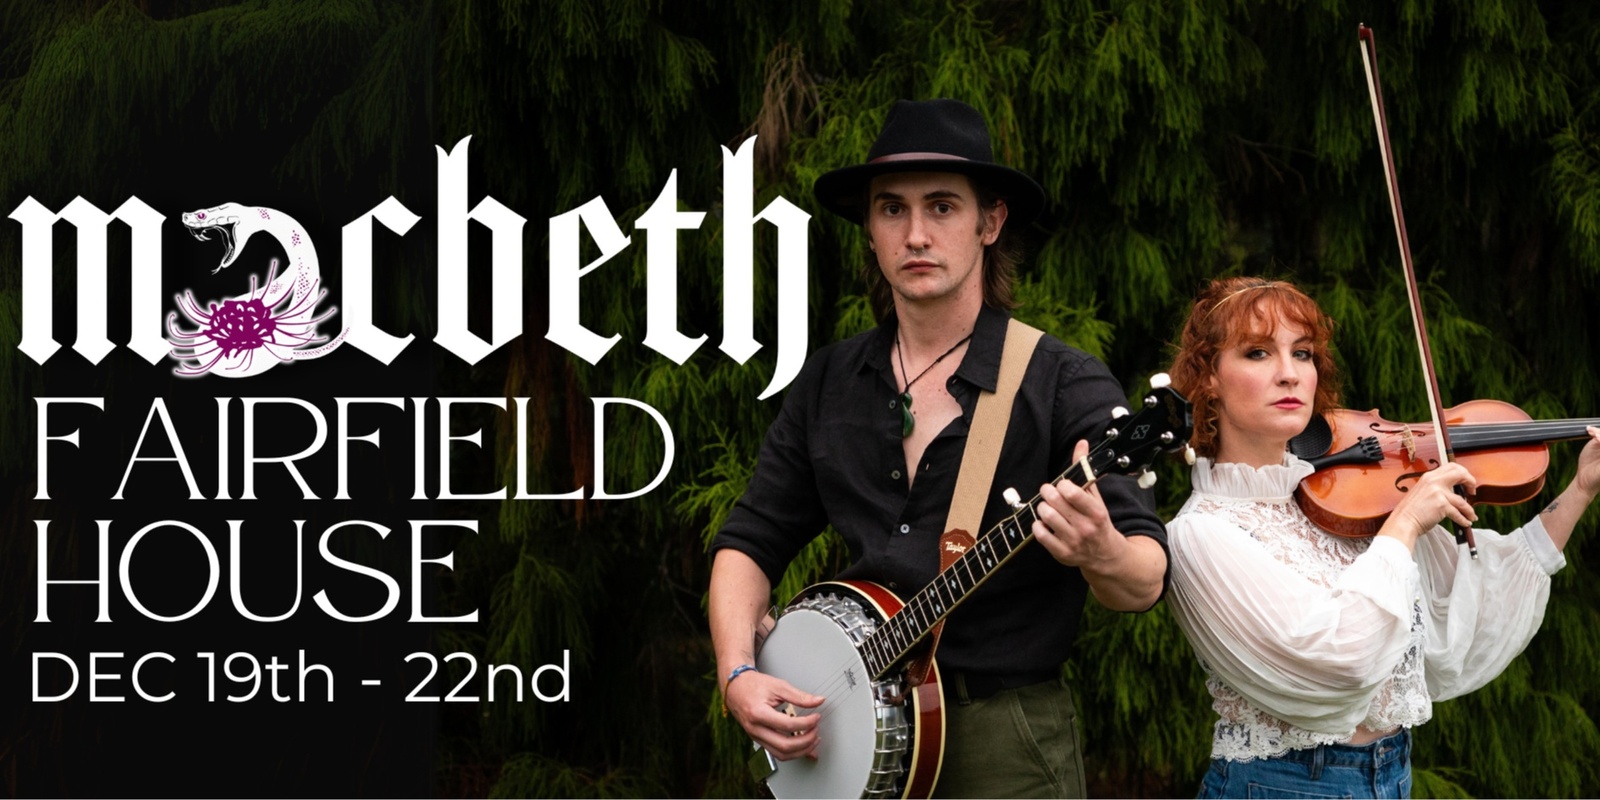 Banner image for The Barden Party presents Macbeth